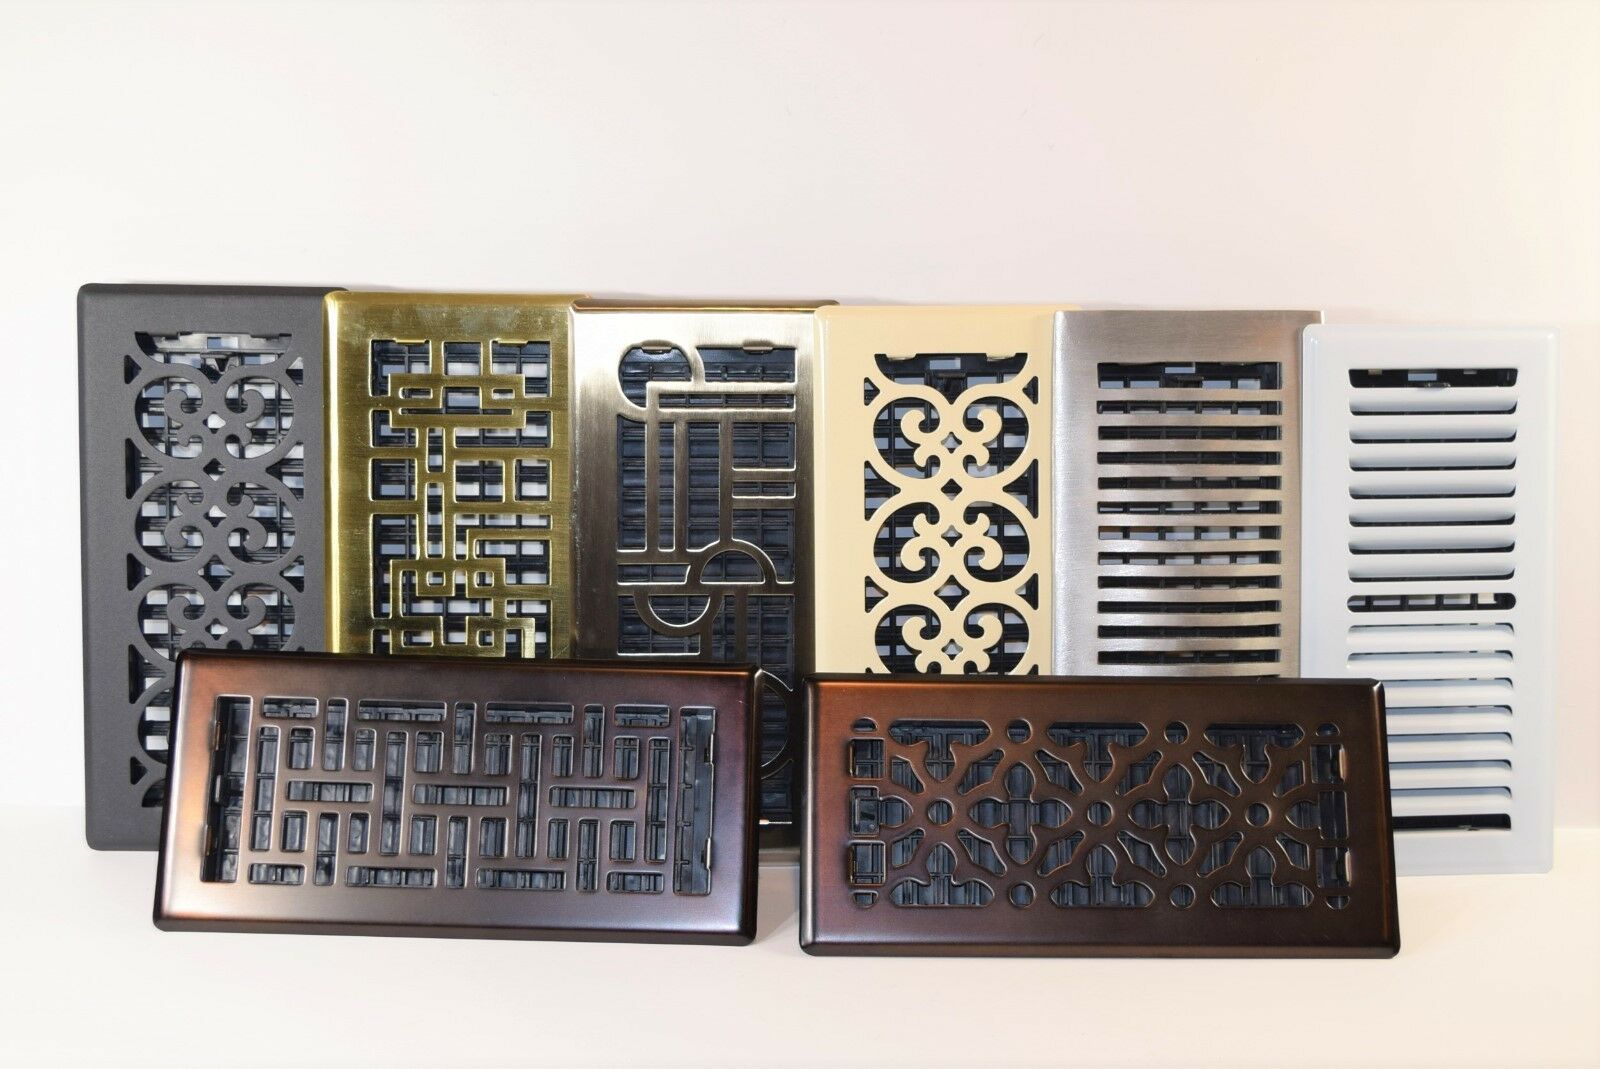 Decor-grates-floor-register-steel-metal-air-vent-scroll-size-inch 2"x12, 4x10in.